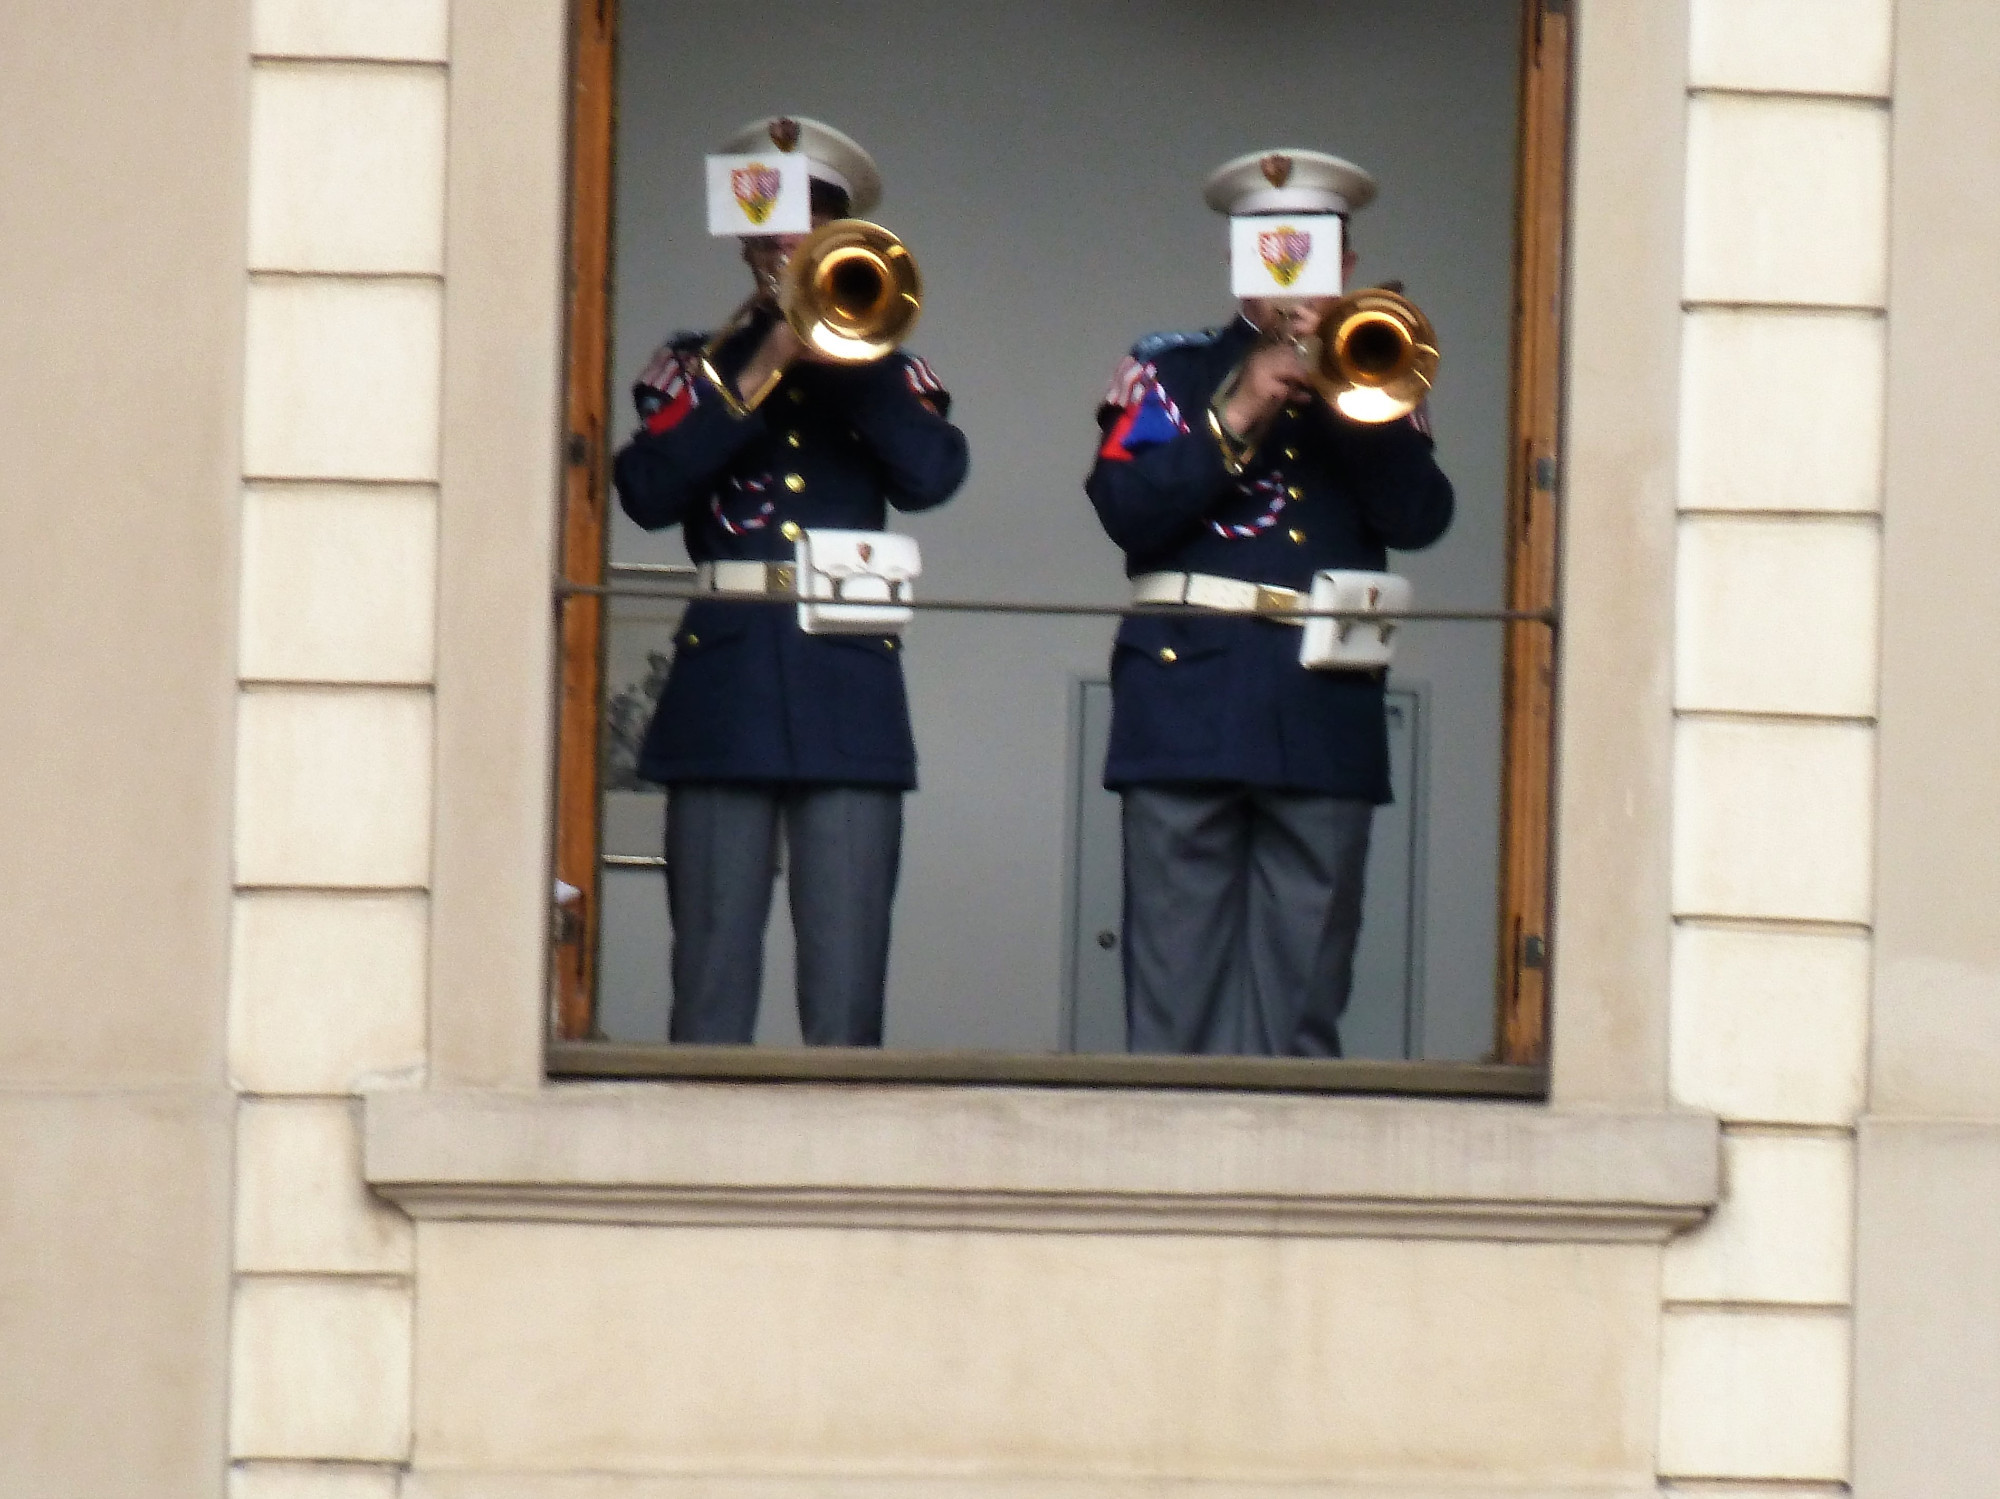 band members playing through Palace window at Changing of the Guard